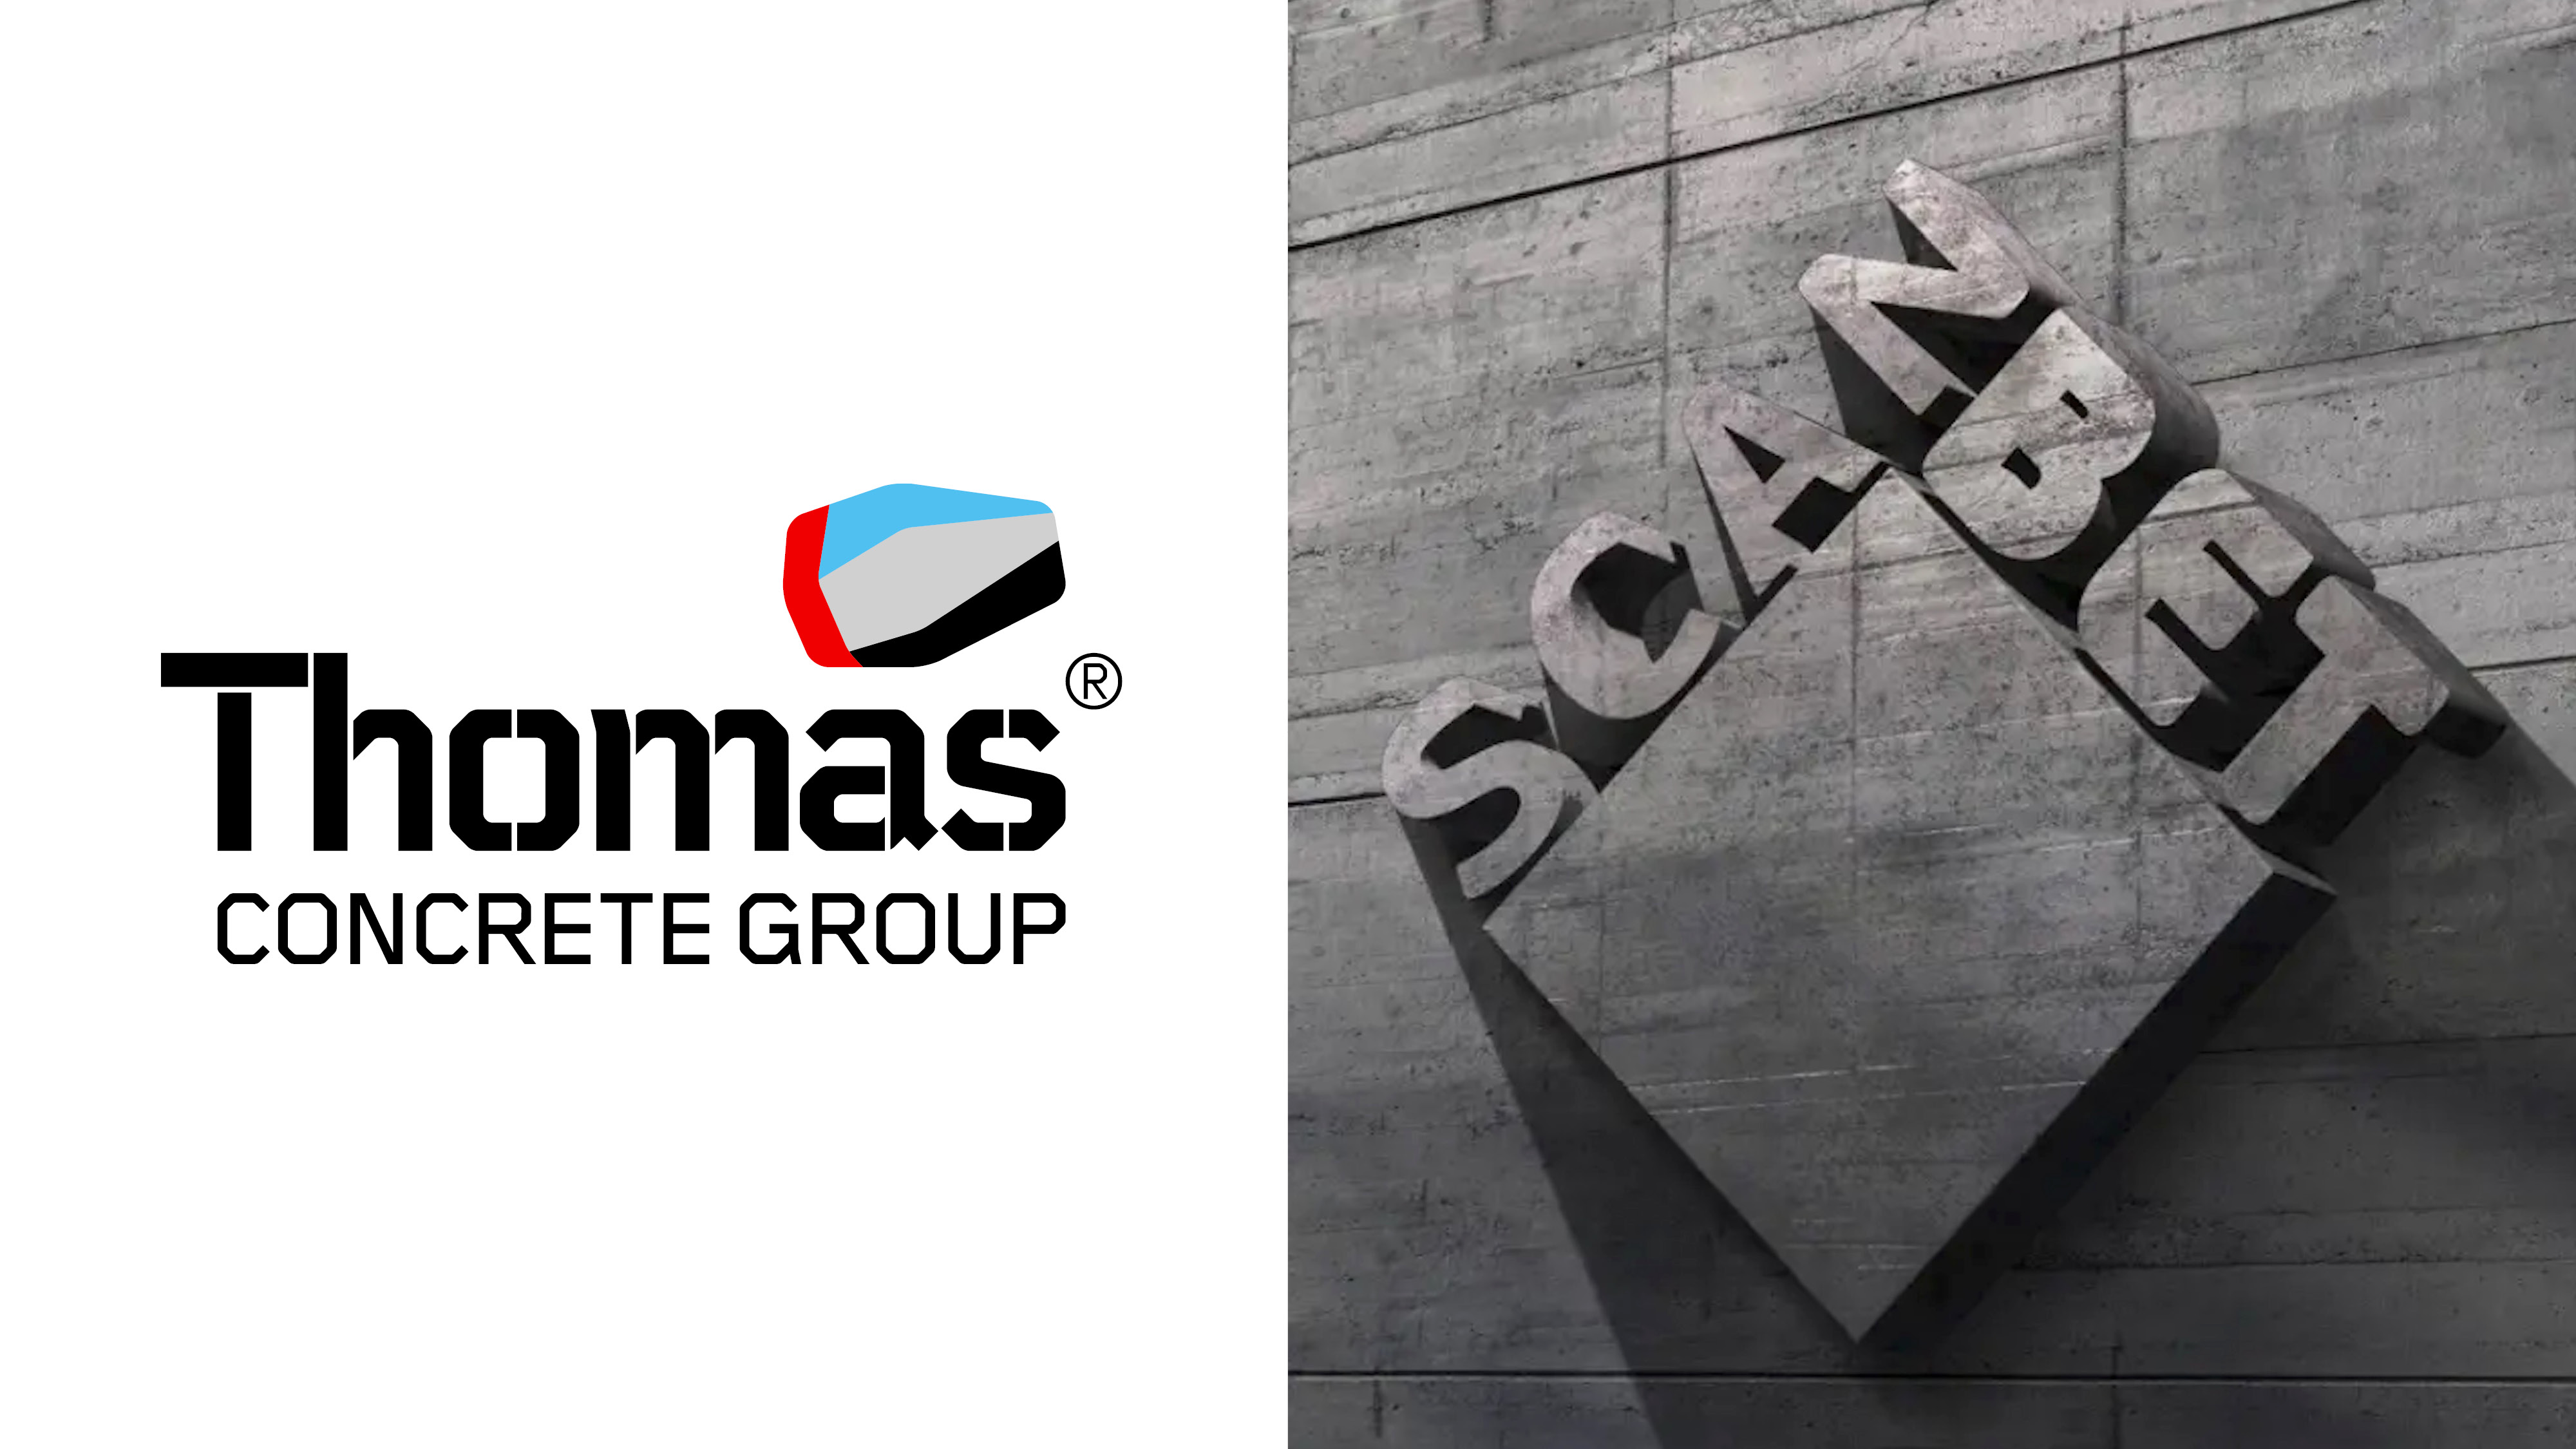 Thomas Concrete Group and Scanbet